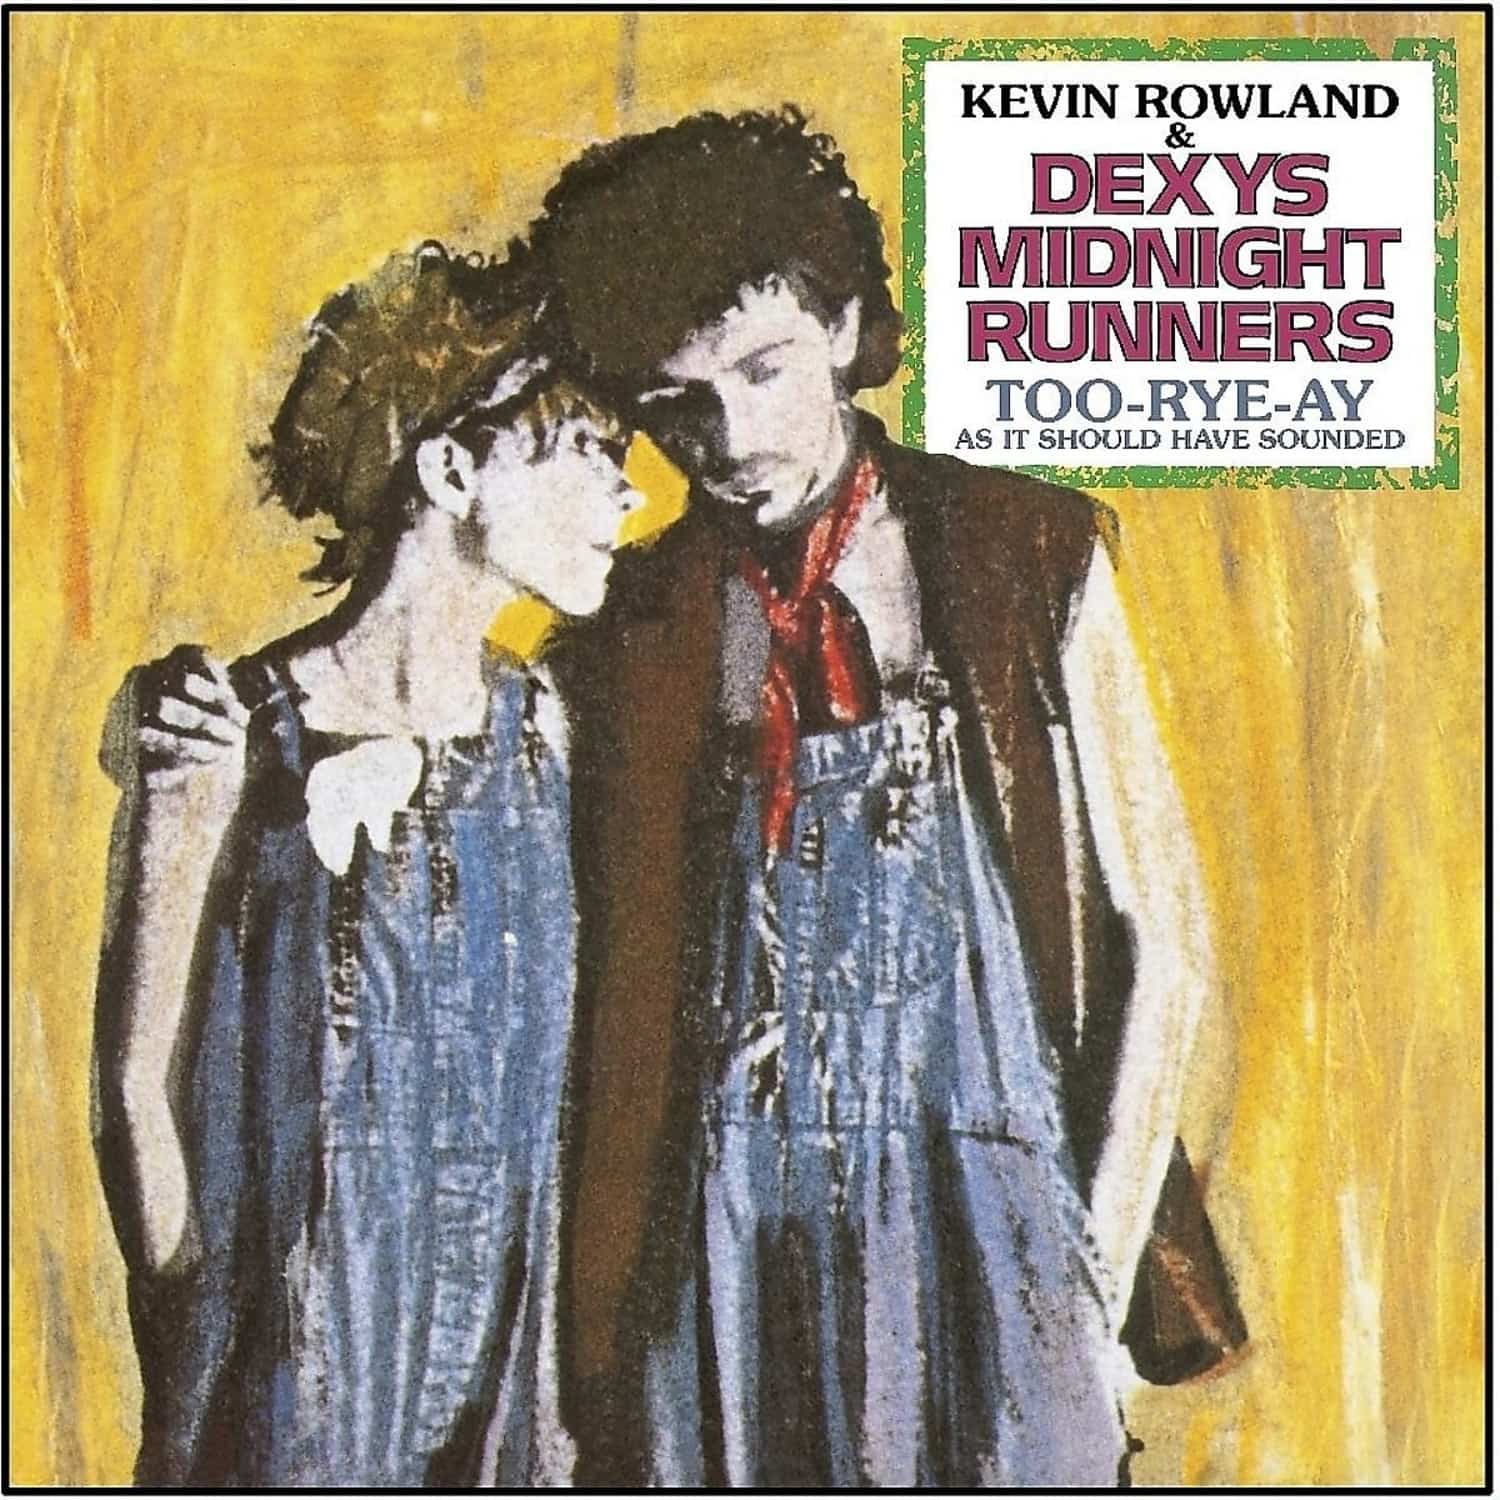 Dexys Midnight Runners & Kevin Rowland - TOO-RYE-AY 